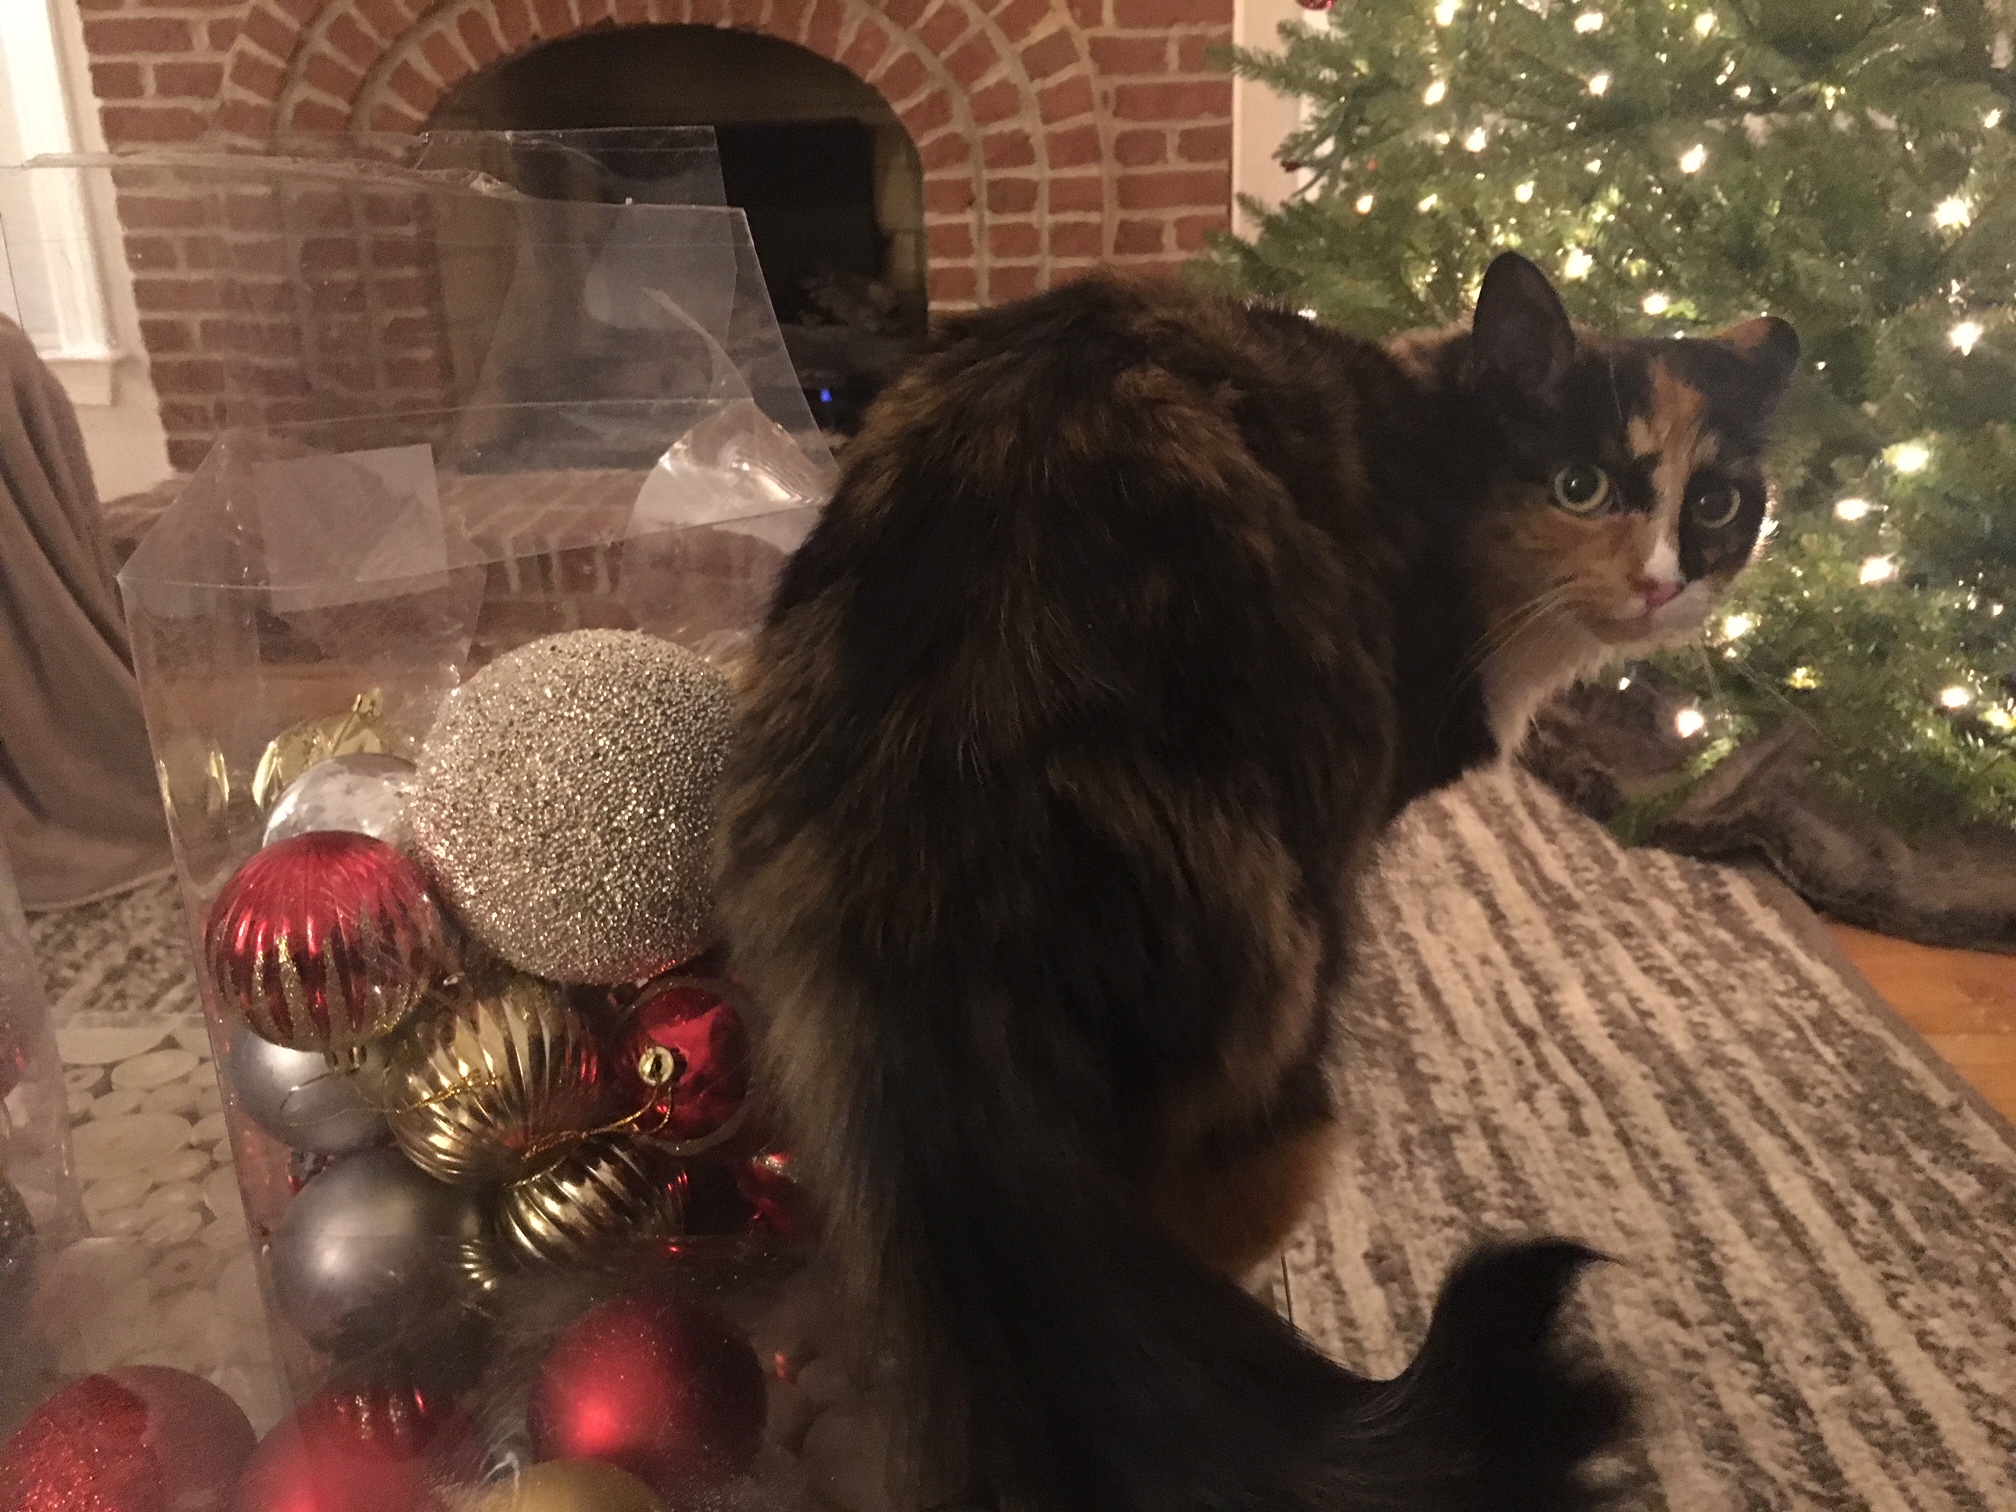 https://www.askamanager.org/wp-content/uploads/2017/12/Olive-prepares-to-decorate-tree.jpg